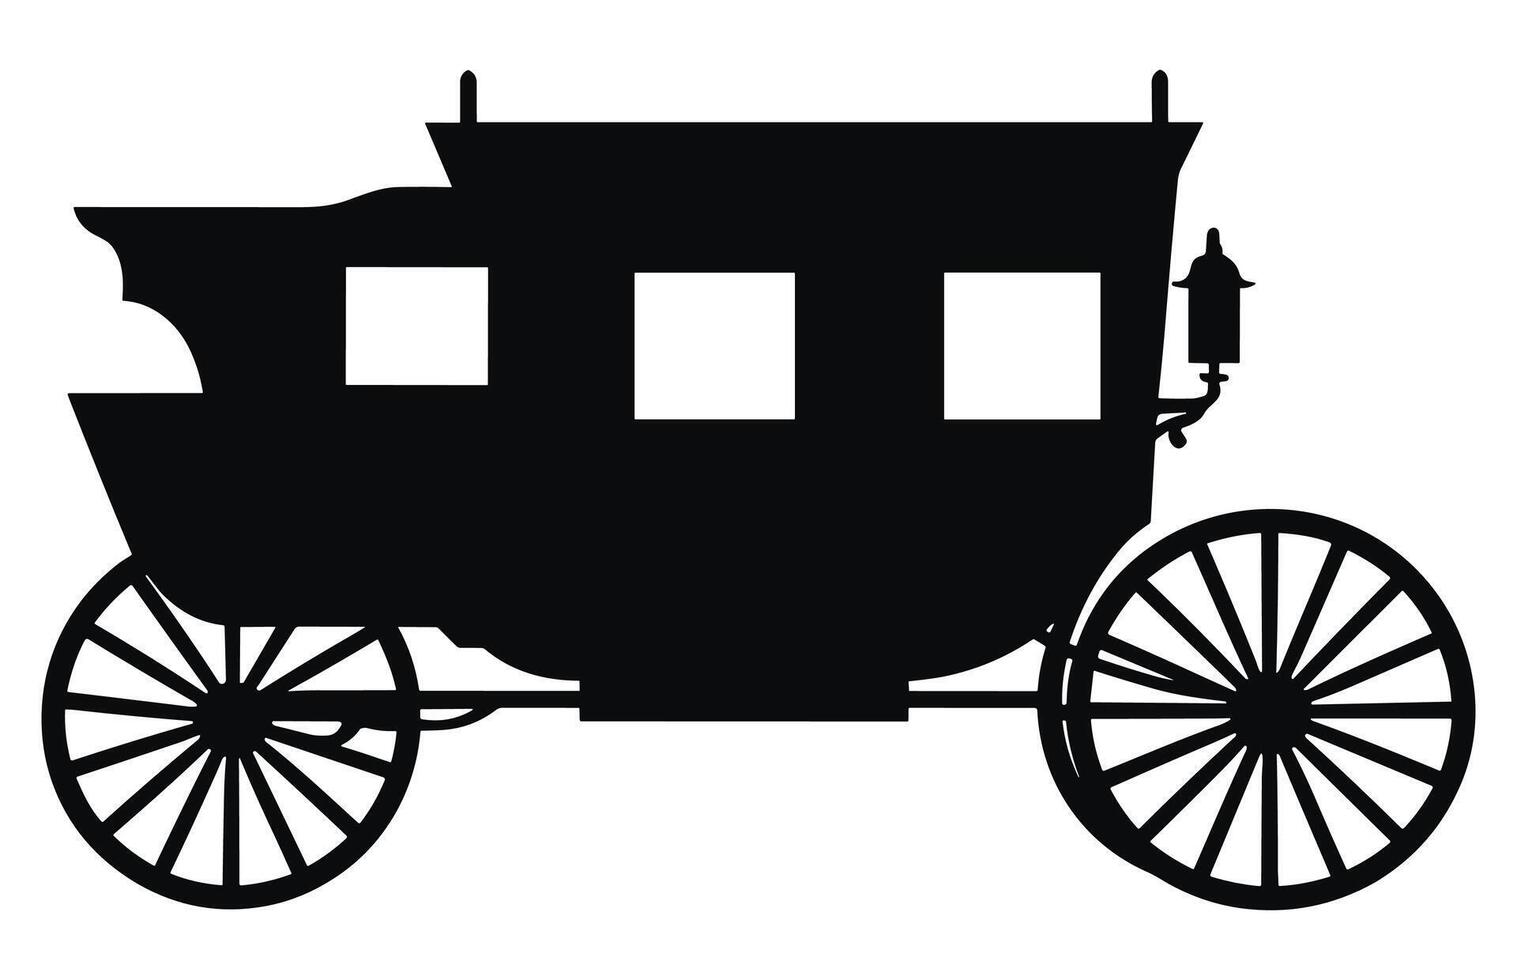 A Stagecoach Vector Silhouette isolated on a white background